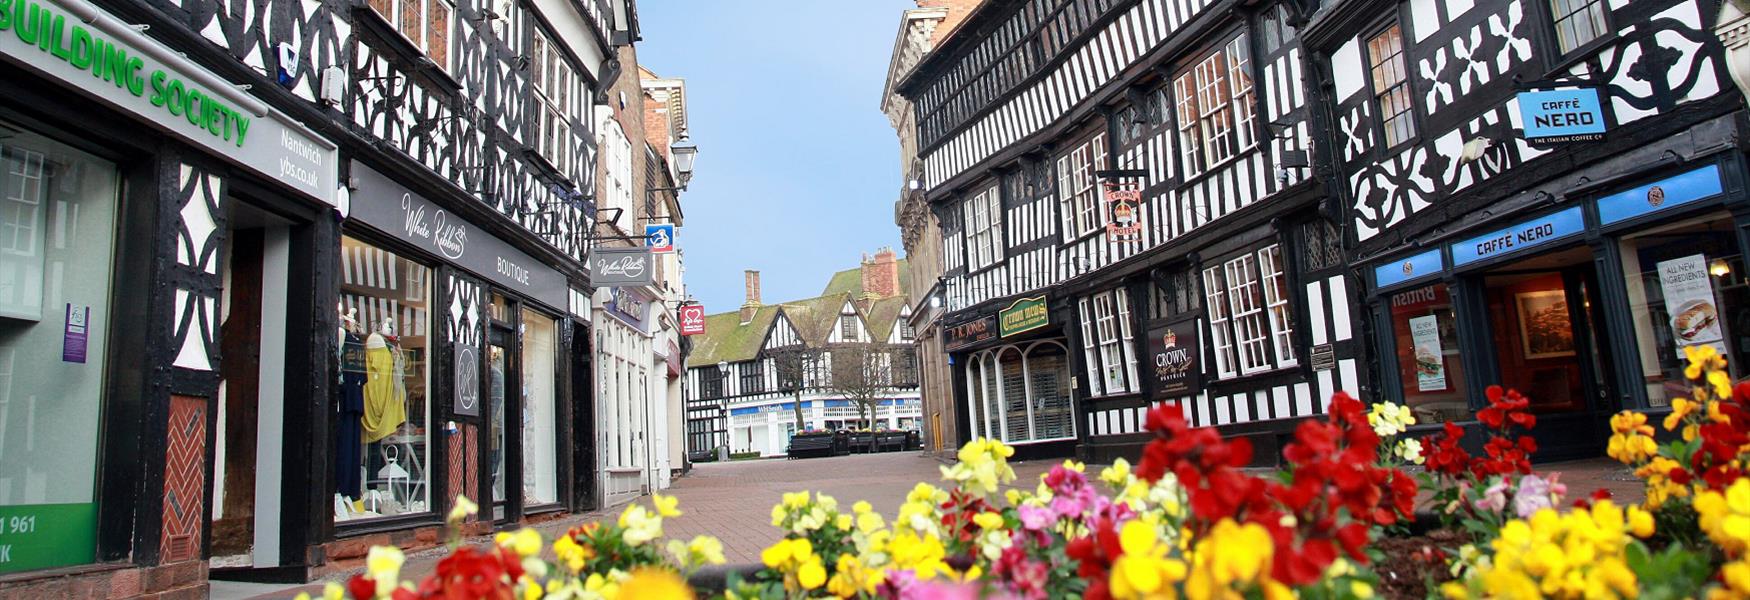 Your guide to Nantwich